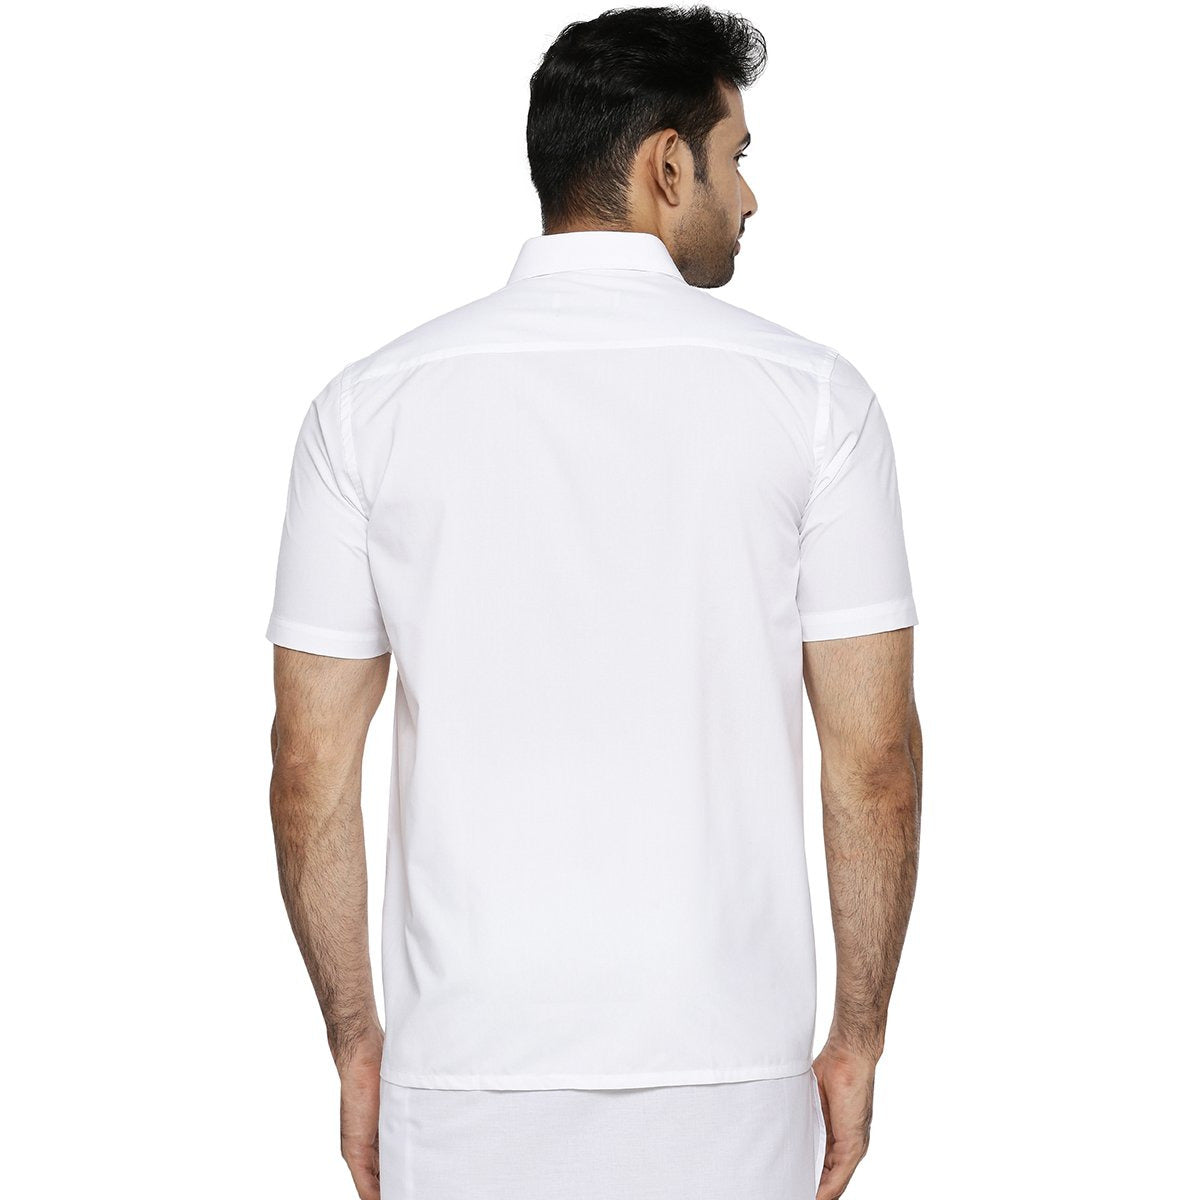 Mens Cotton White Shirt Half Sleeves Plus Size Soft Touch-Back view